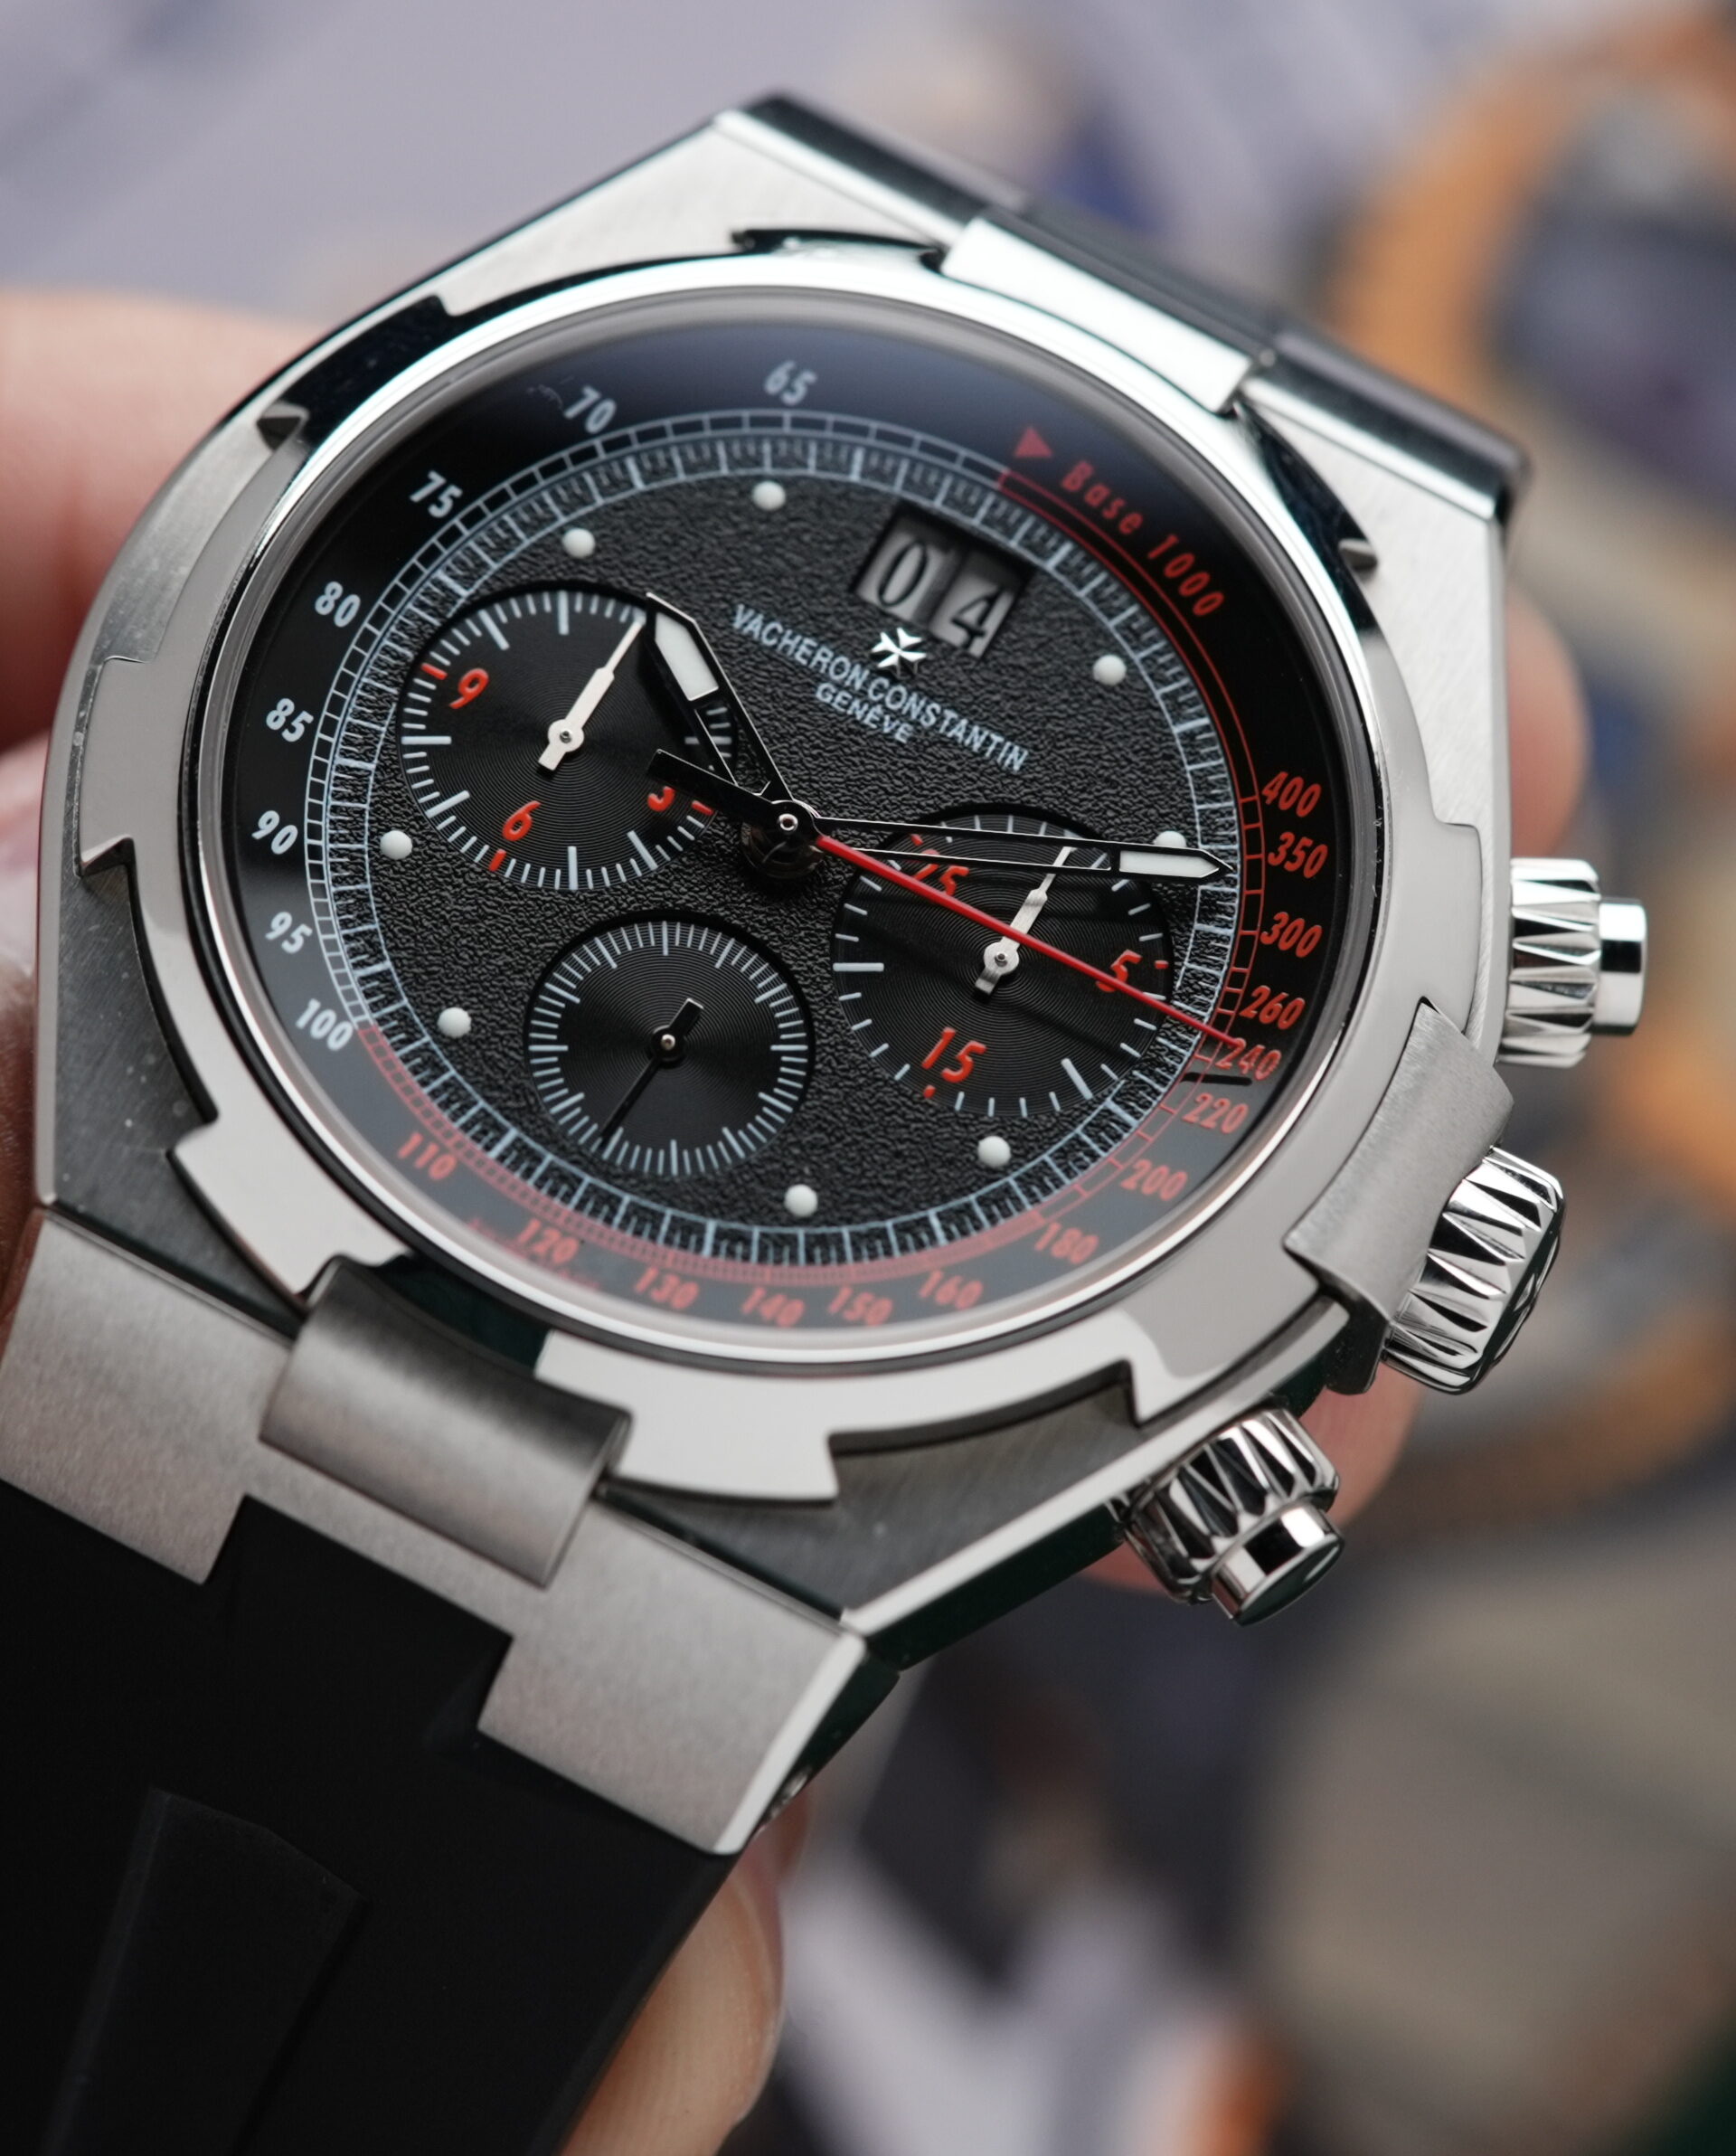 Vacheron Constantin Overseas Chronograph for £16,681 for sale from a  Private Seller on Chrono24